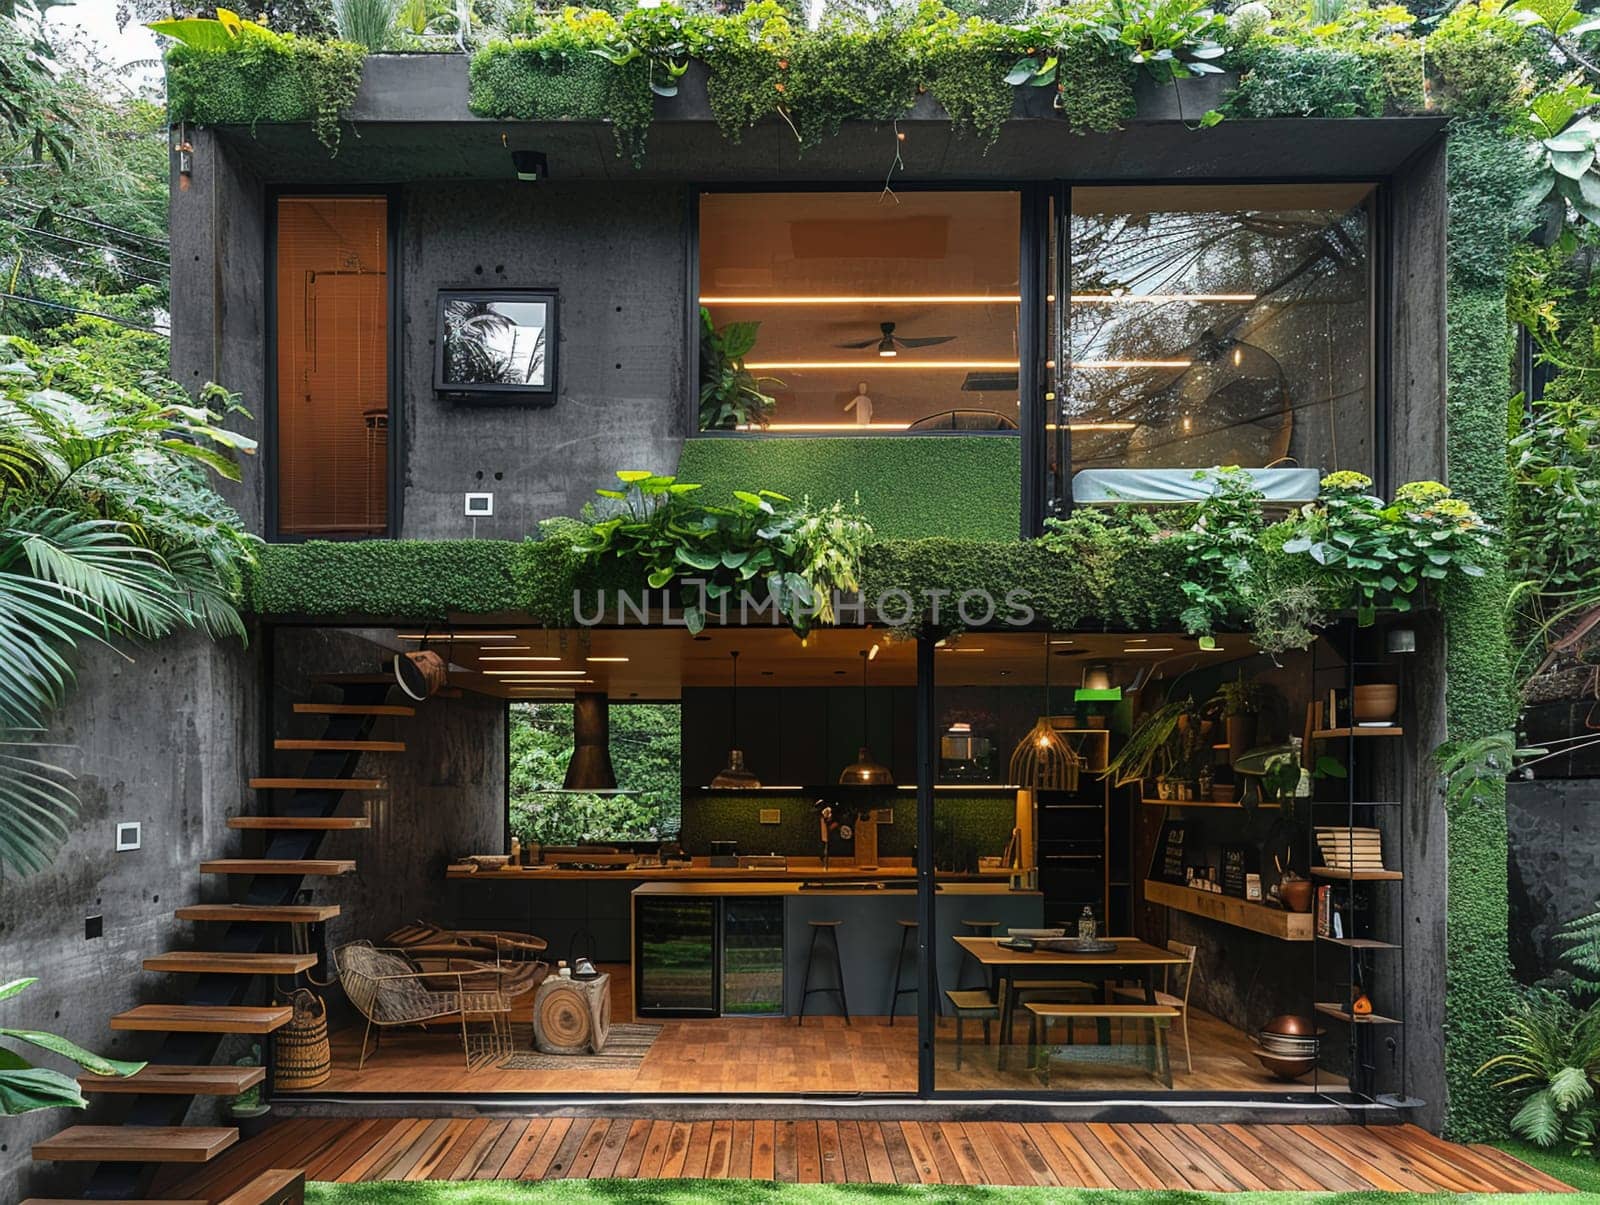 Sustainable home interior with recycled materials and green walls by Benzoix